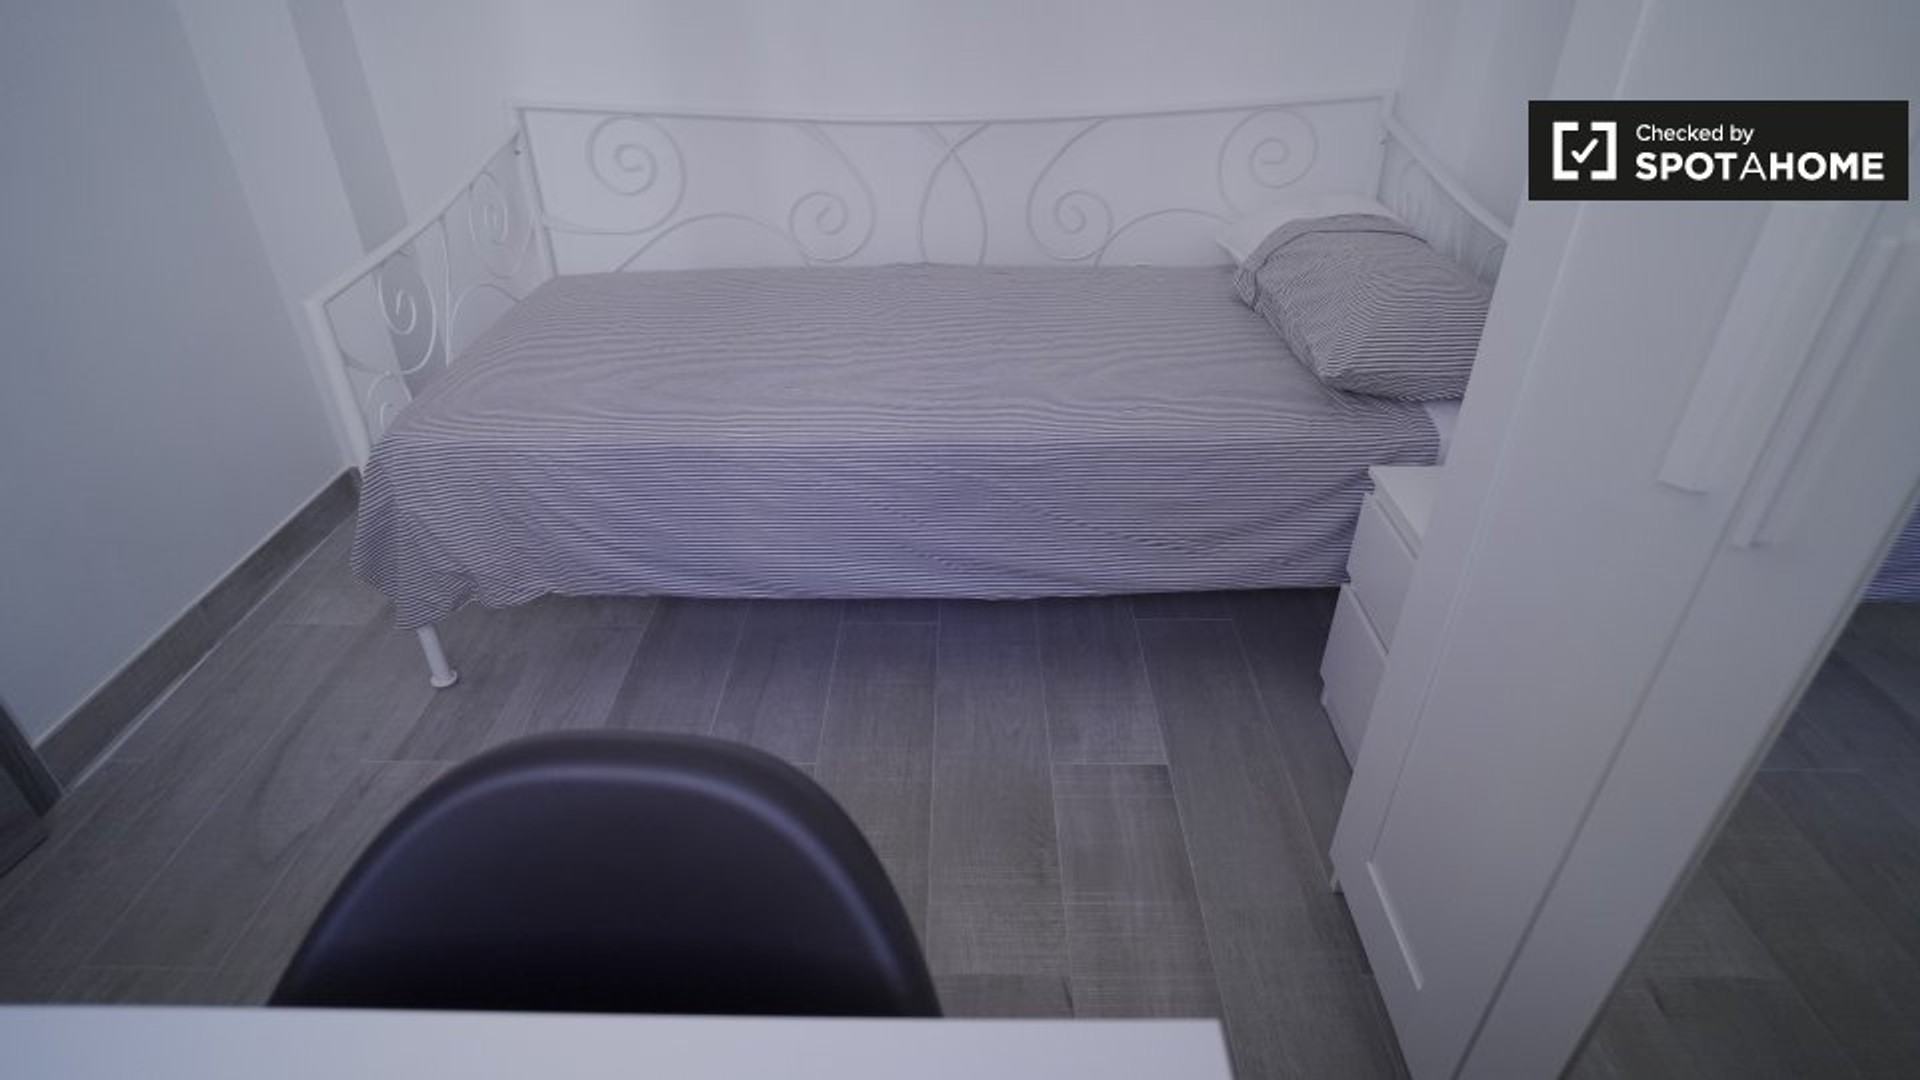 Room for rent in a shared flat in Seville